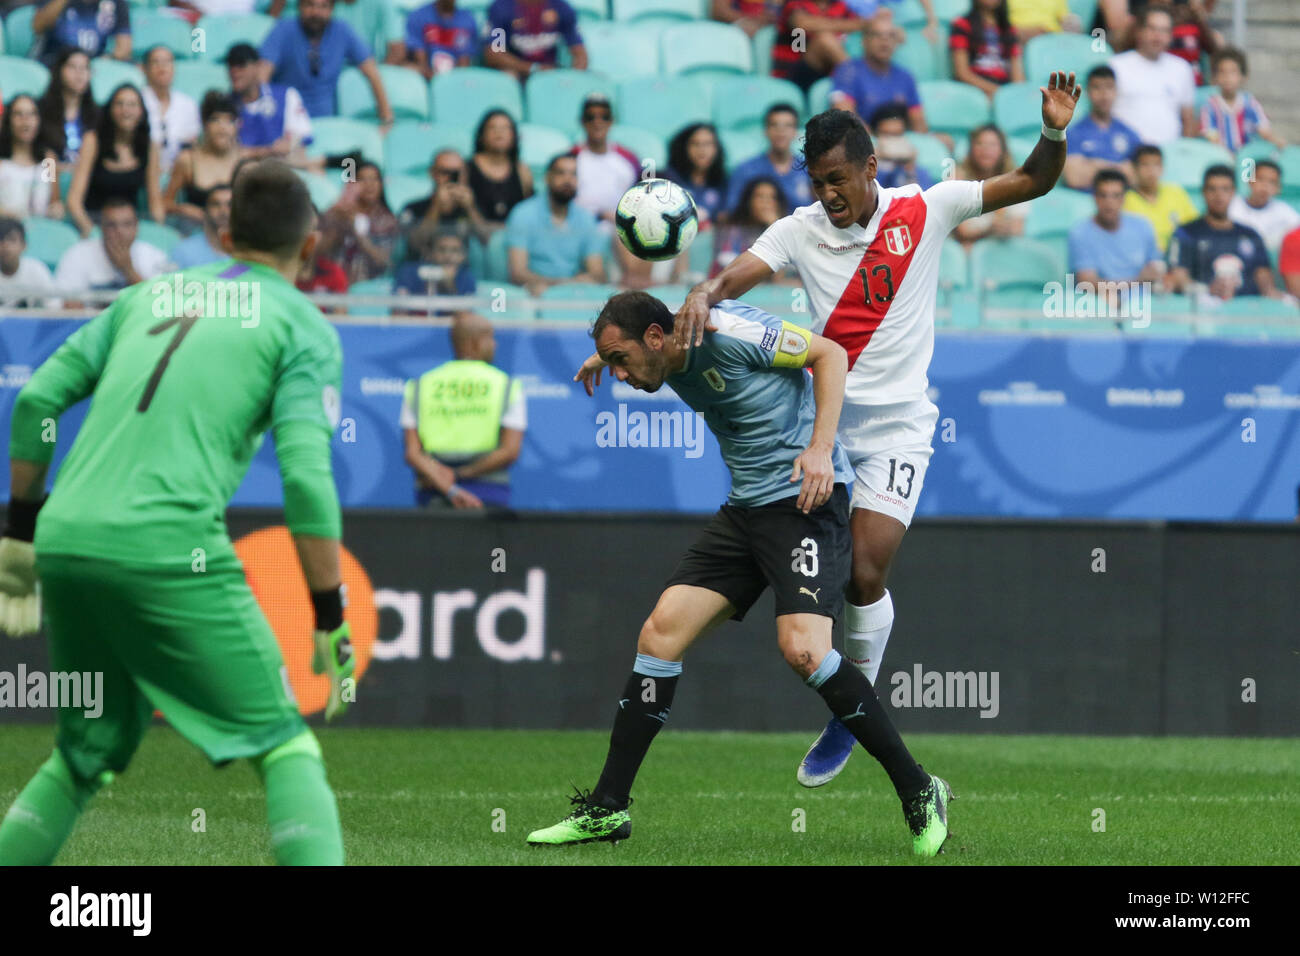 Salvador, Brazil. 29th June, 2019. Diego Godin and Renato Tapia, during a match between Uruguay and Peru, valid for the quarterfinals of the Copa América 2019, held this Saturday (29) at the Fonte Nova Arena in Salvador, Bahia, Brazil. Credit: Tiago Caldas/FotoArena/Alamy Live News Stock Photo